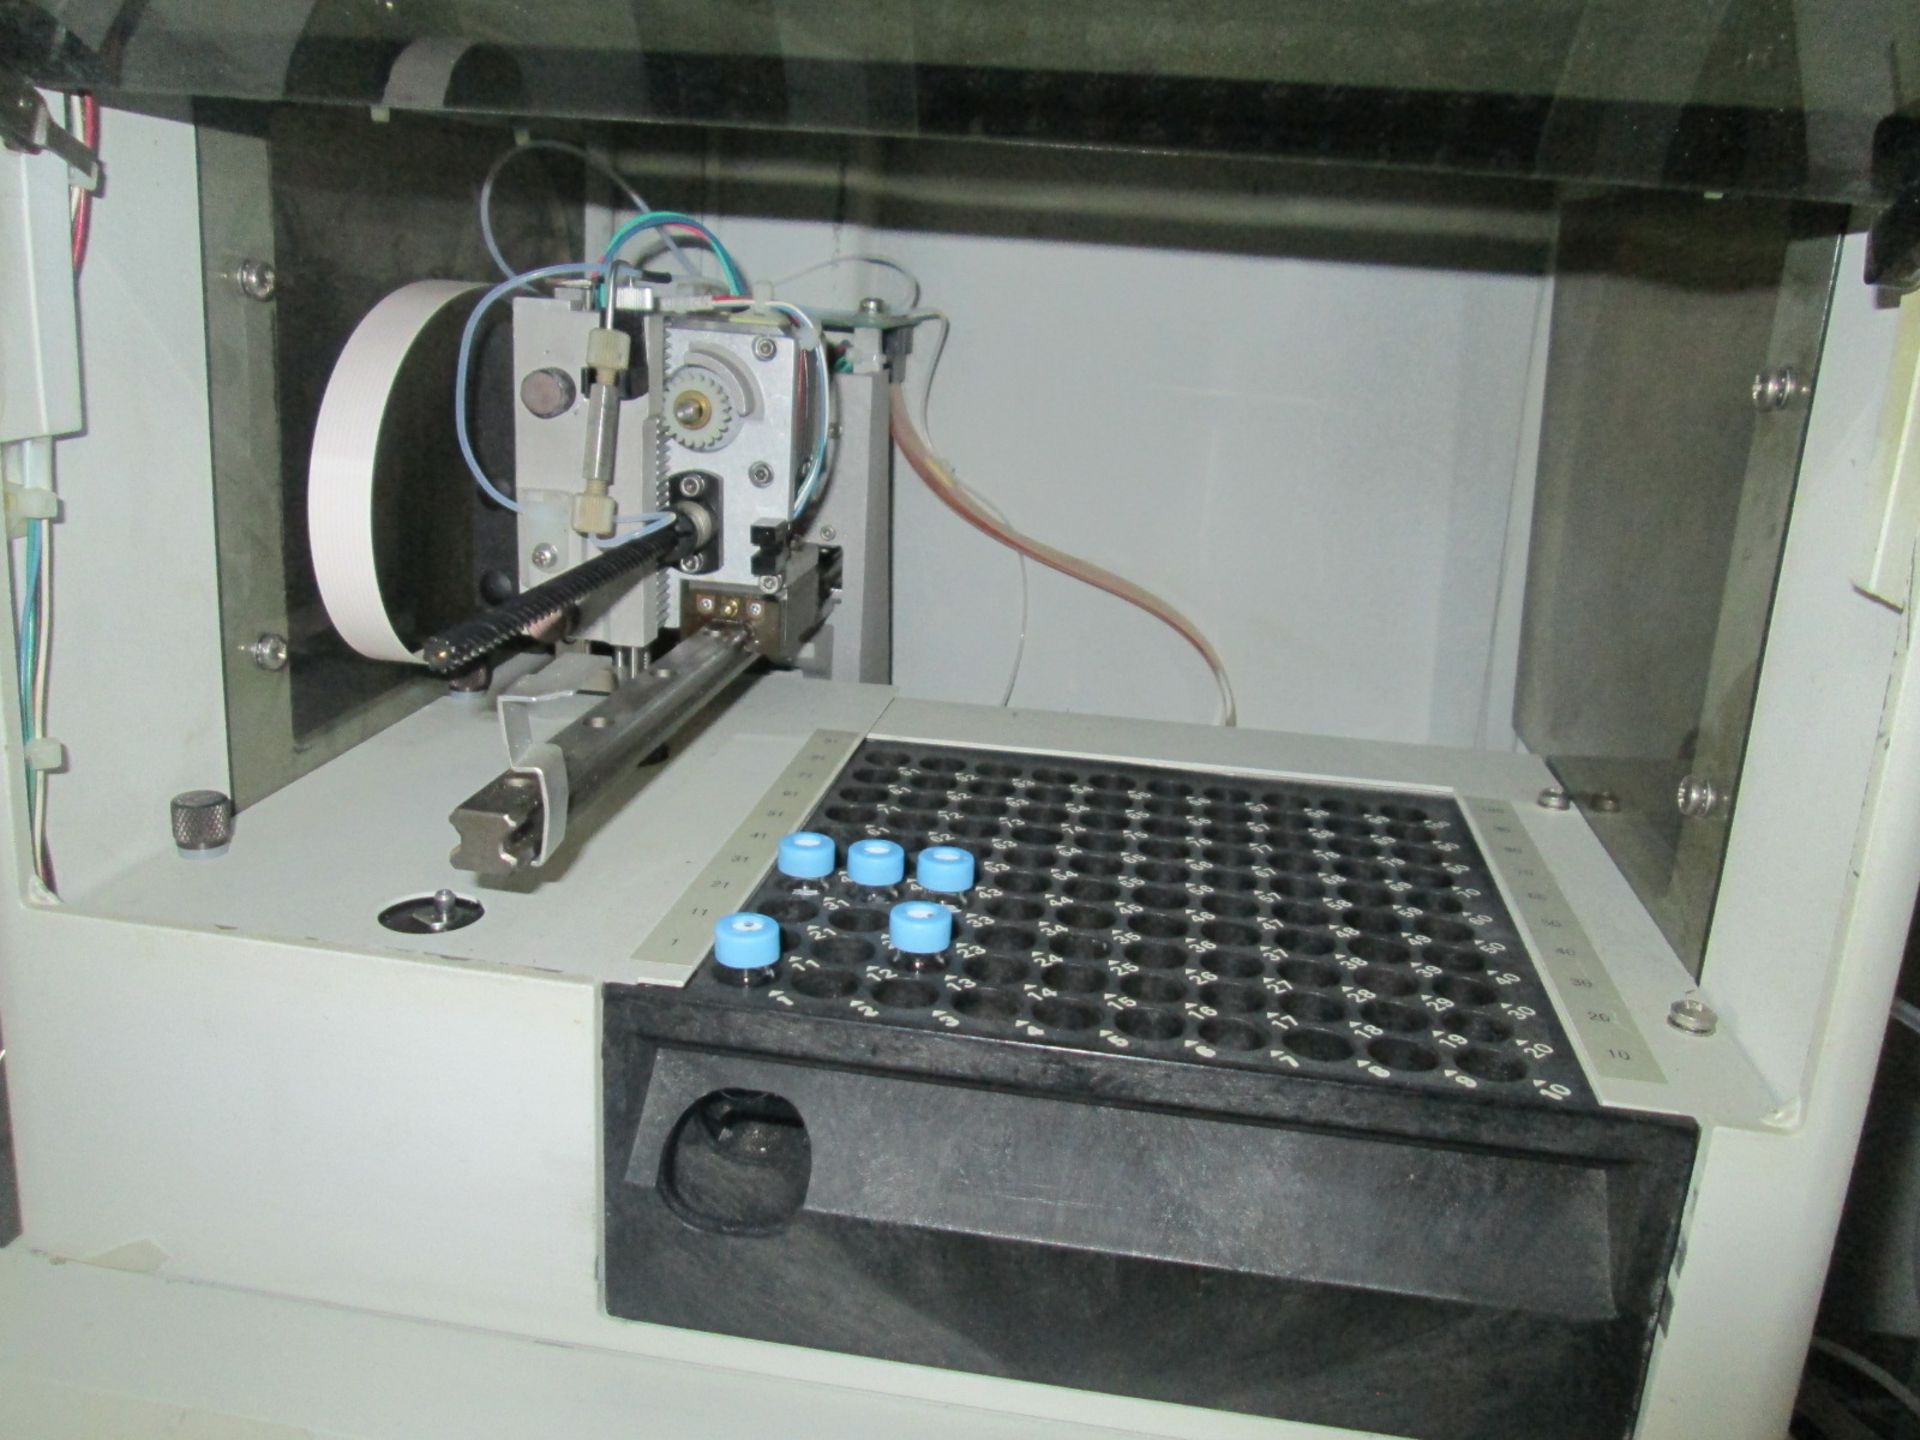 HPLC System / Applied Bio Systems Absorbance Detector / AutoSampler / Pumps / IT Gear etc. - Image 6 of 18